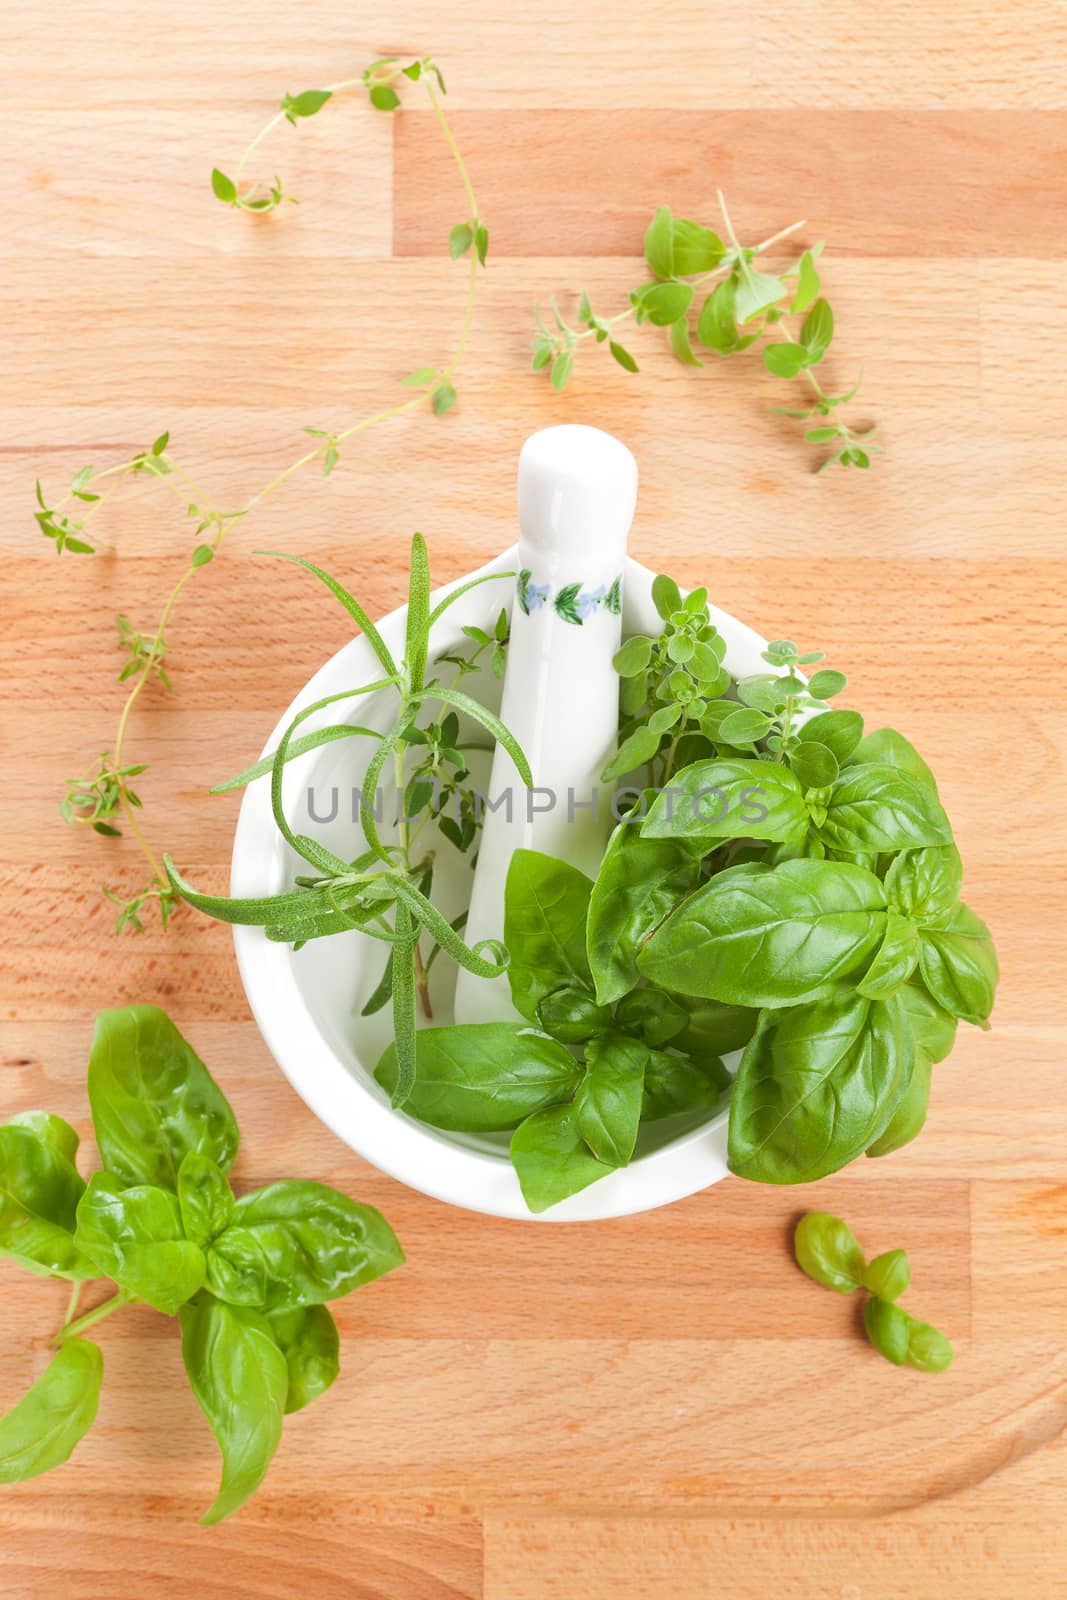 Fresh culinary aromatic herbs basil, thyme and rosemary in mortar with pestle on wooden background. Top view.